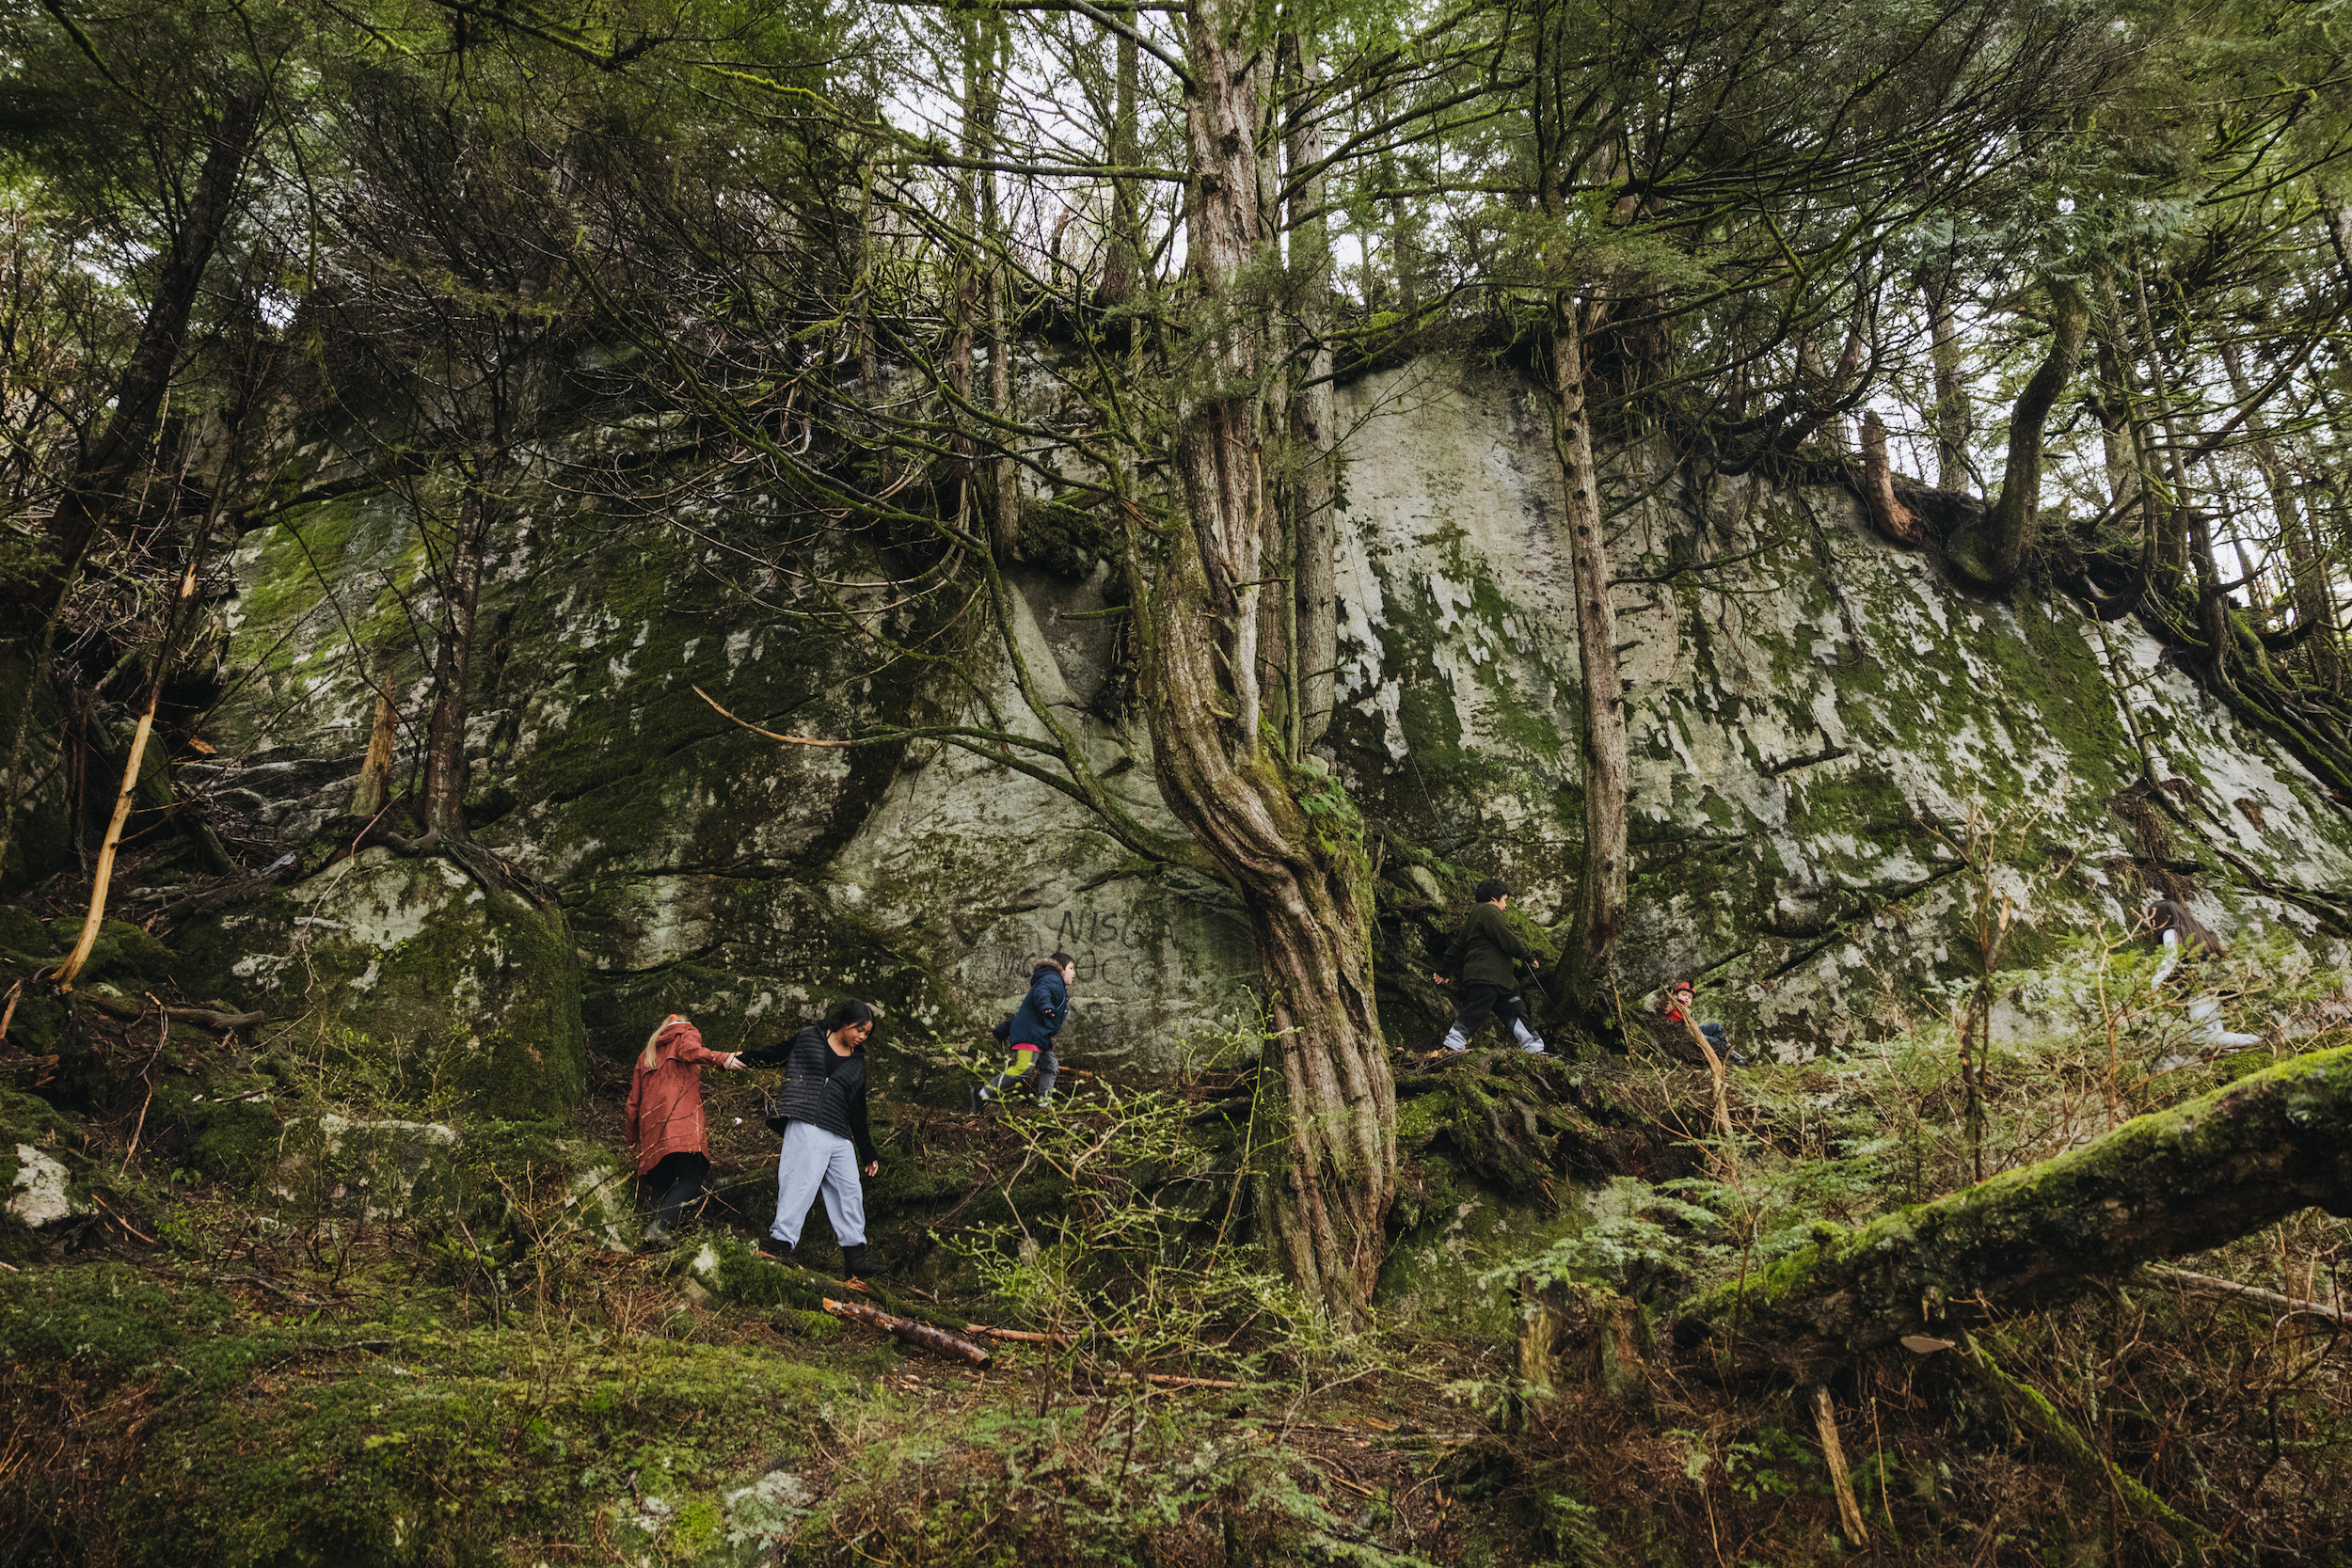 Nisga'a youth climbing in the village of Gingolx